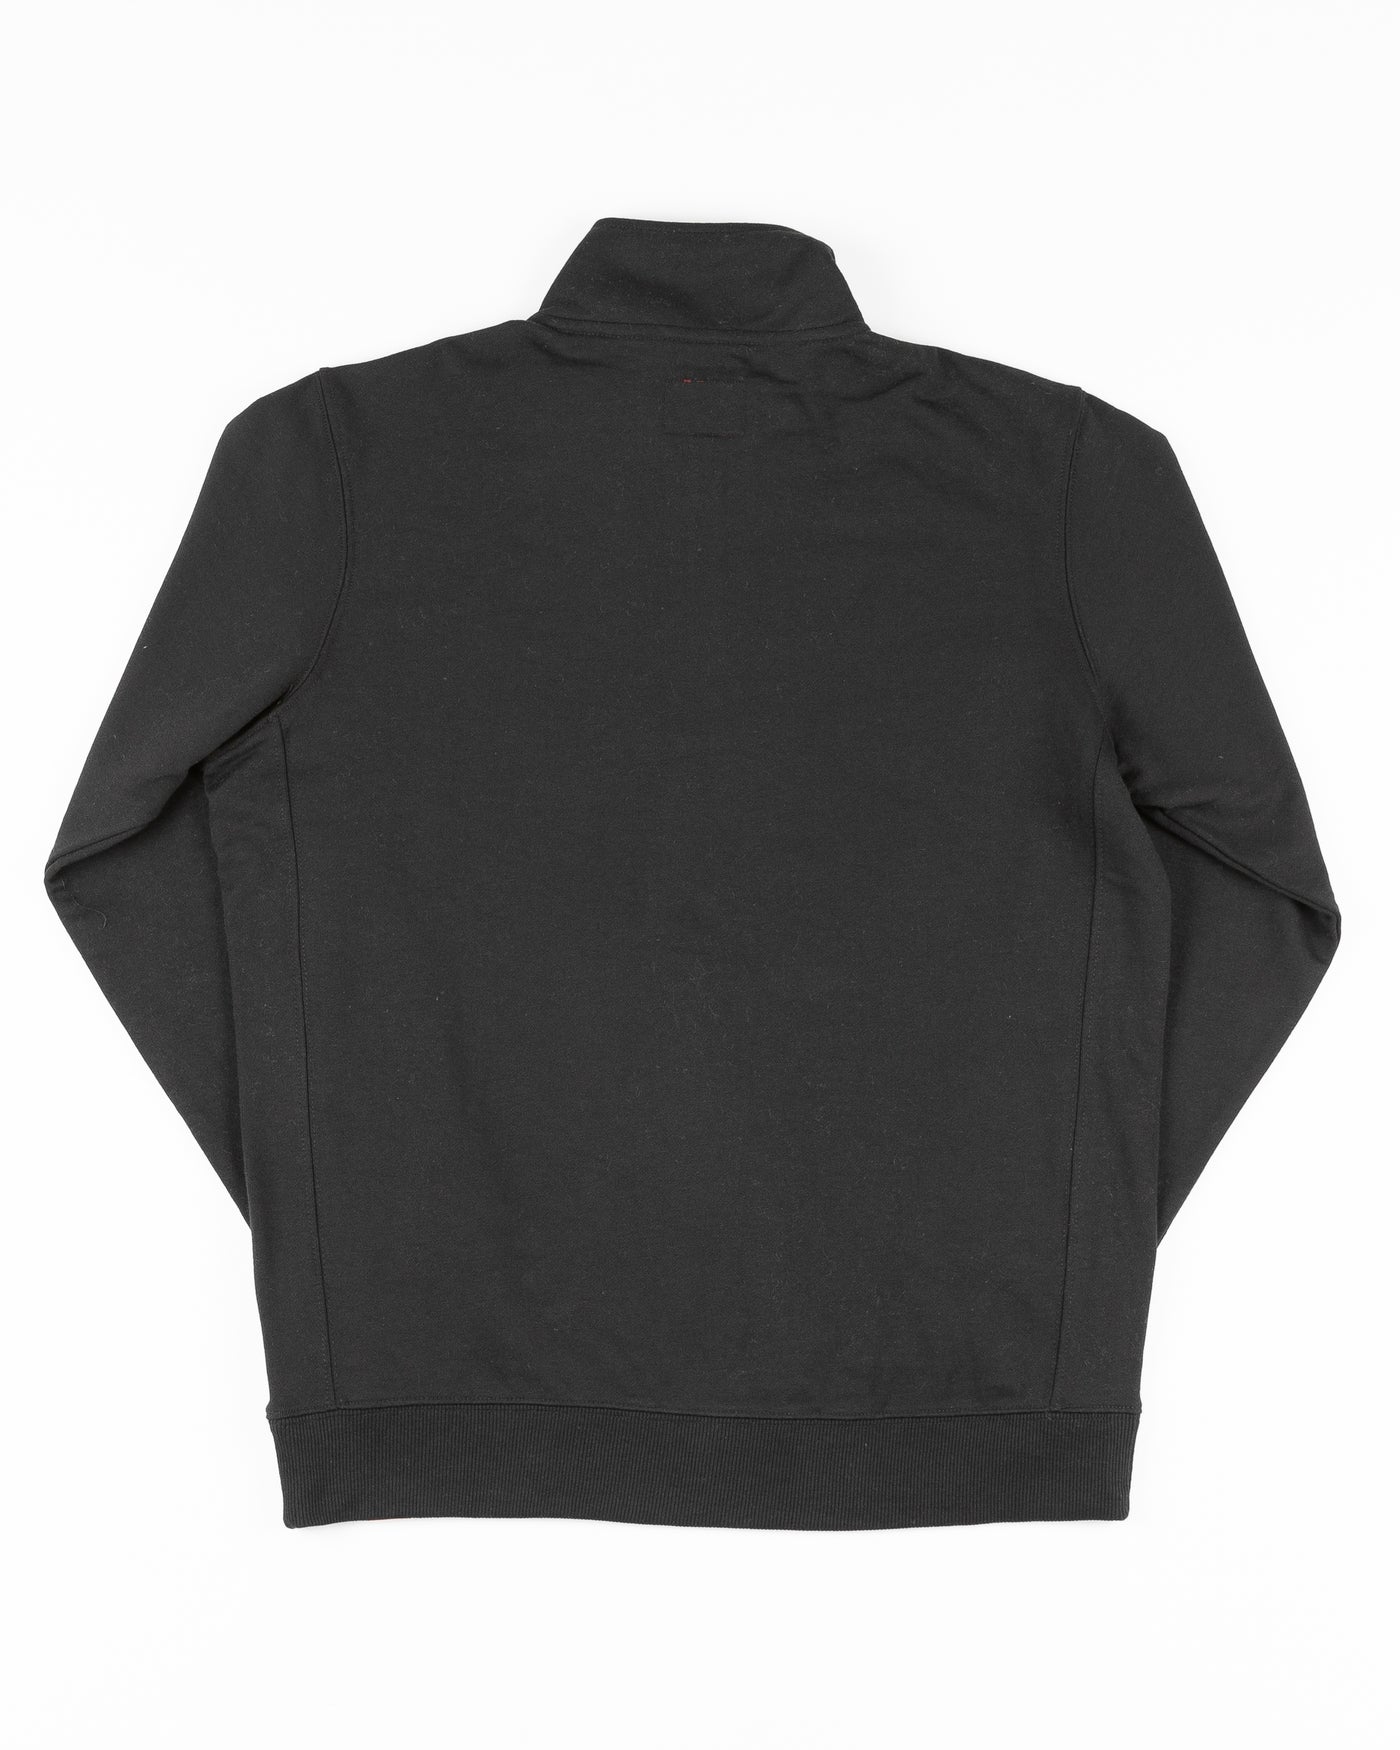 black Sportiqe quarter zip with Chicago Blackhawks primary logo embroidered on left chest - back lay flat